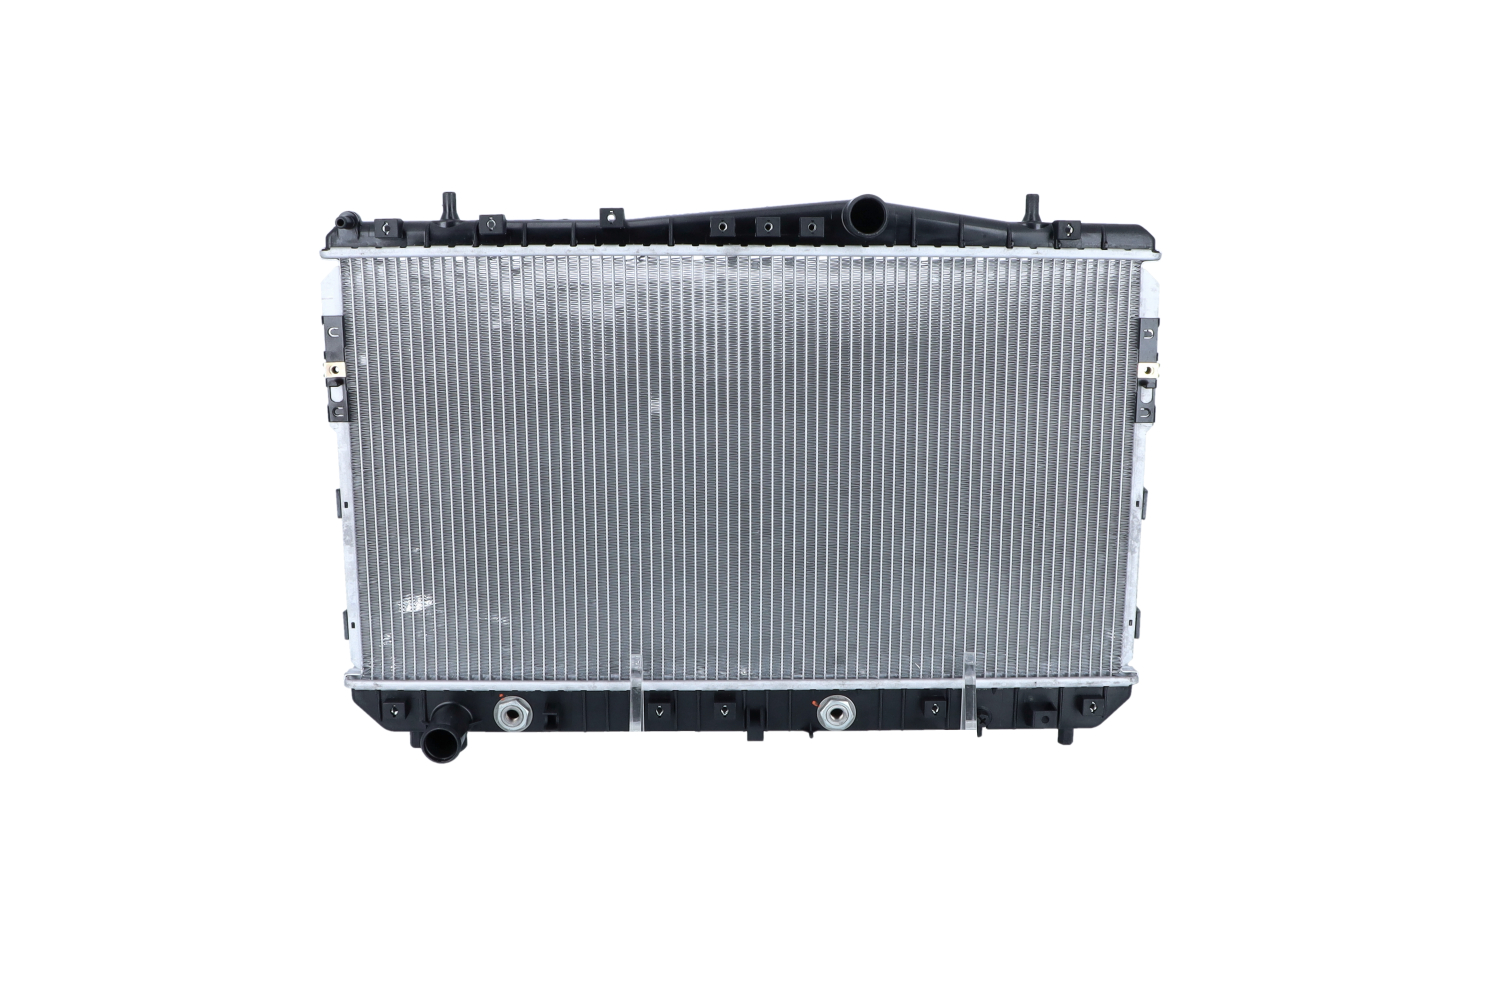 NRF 53732 Engine radiator Aluminium, 698 x 370 x 16 mm, with mounting parts, Brazed cooling fins